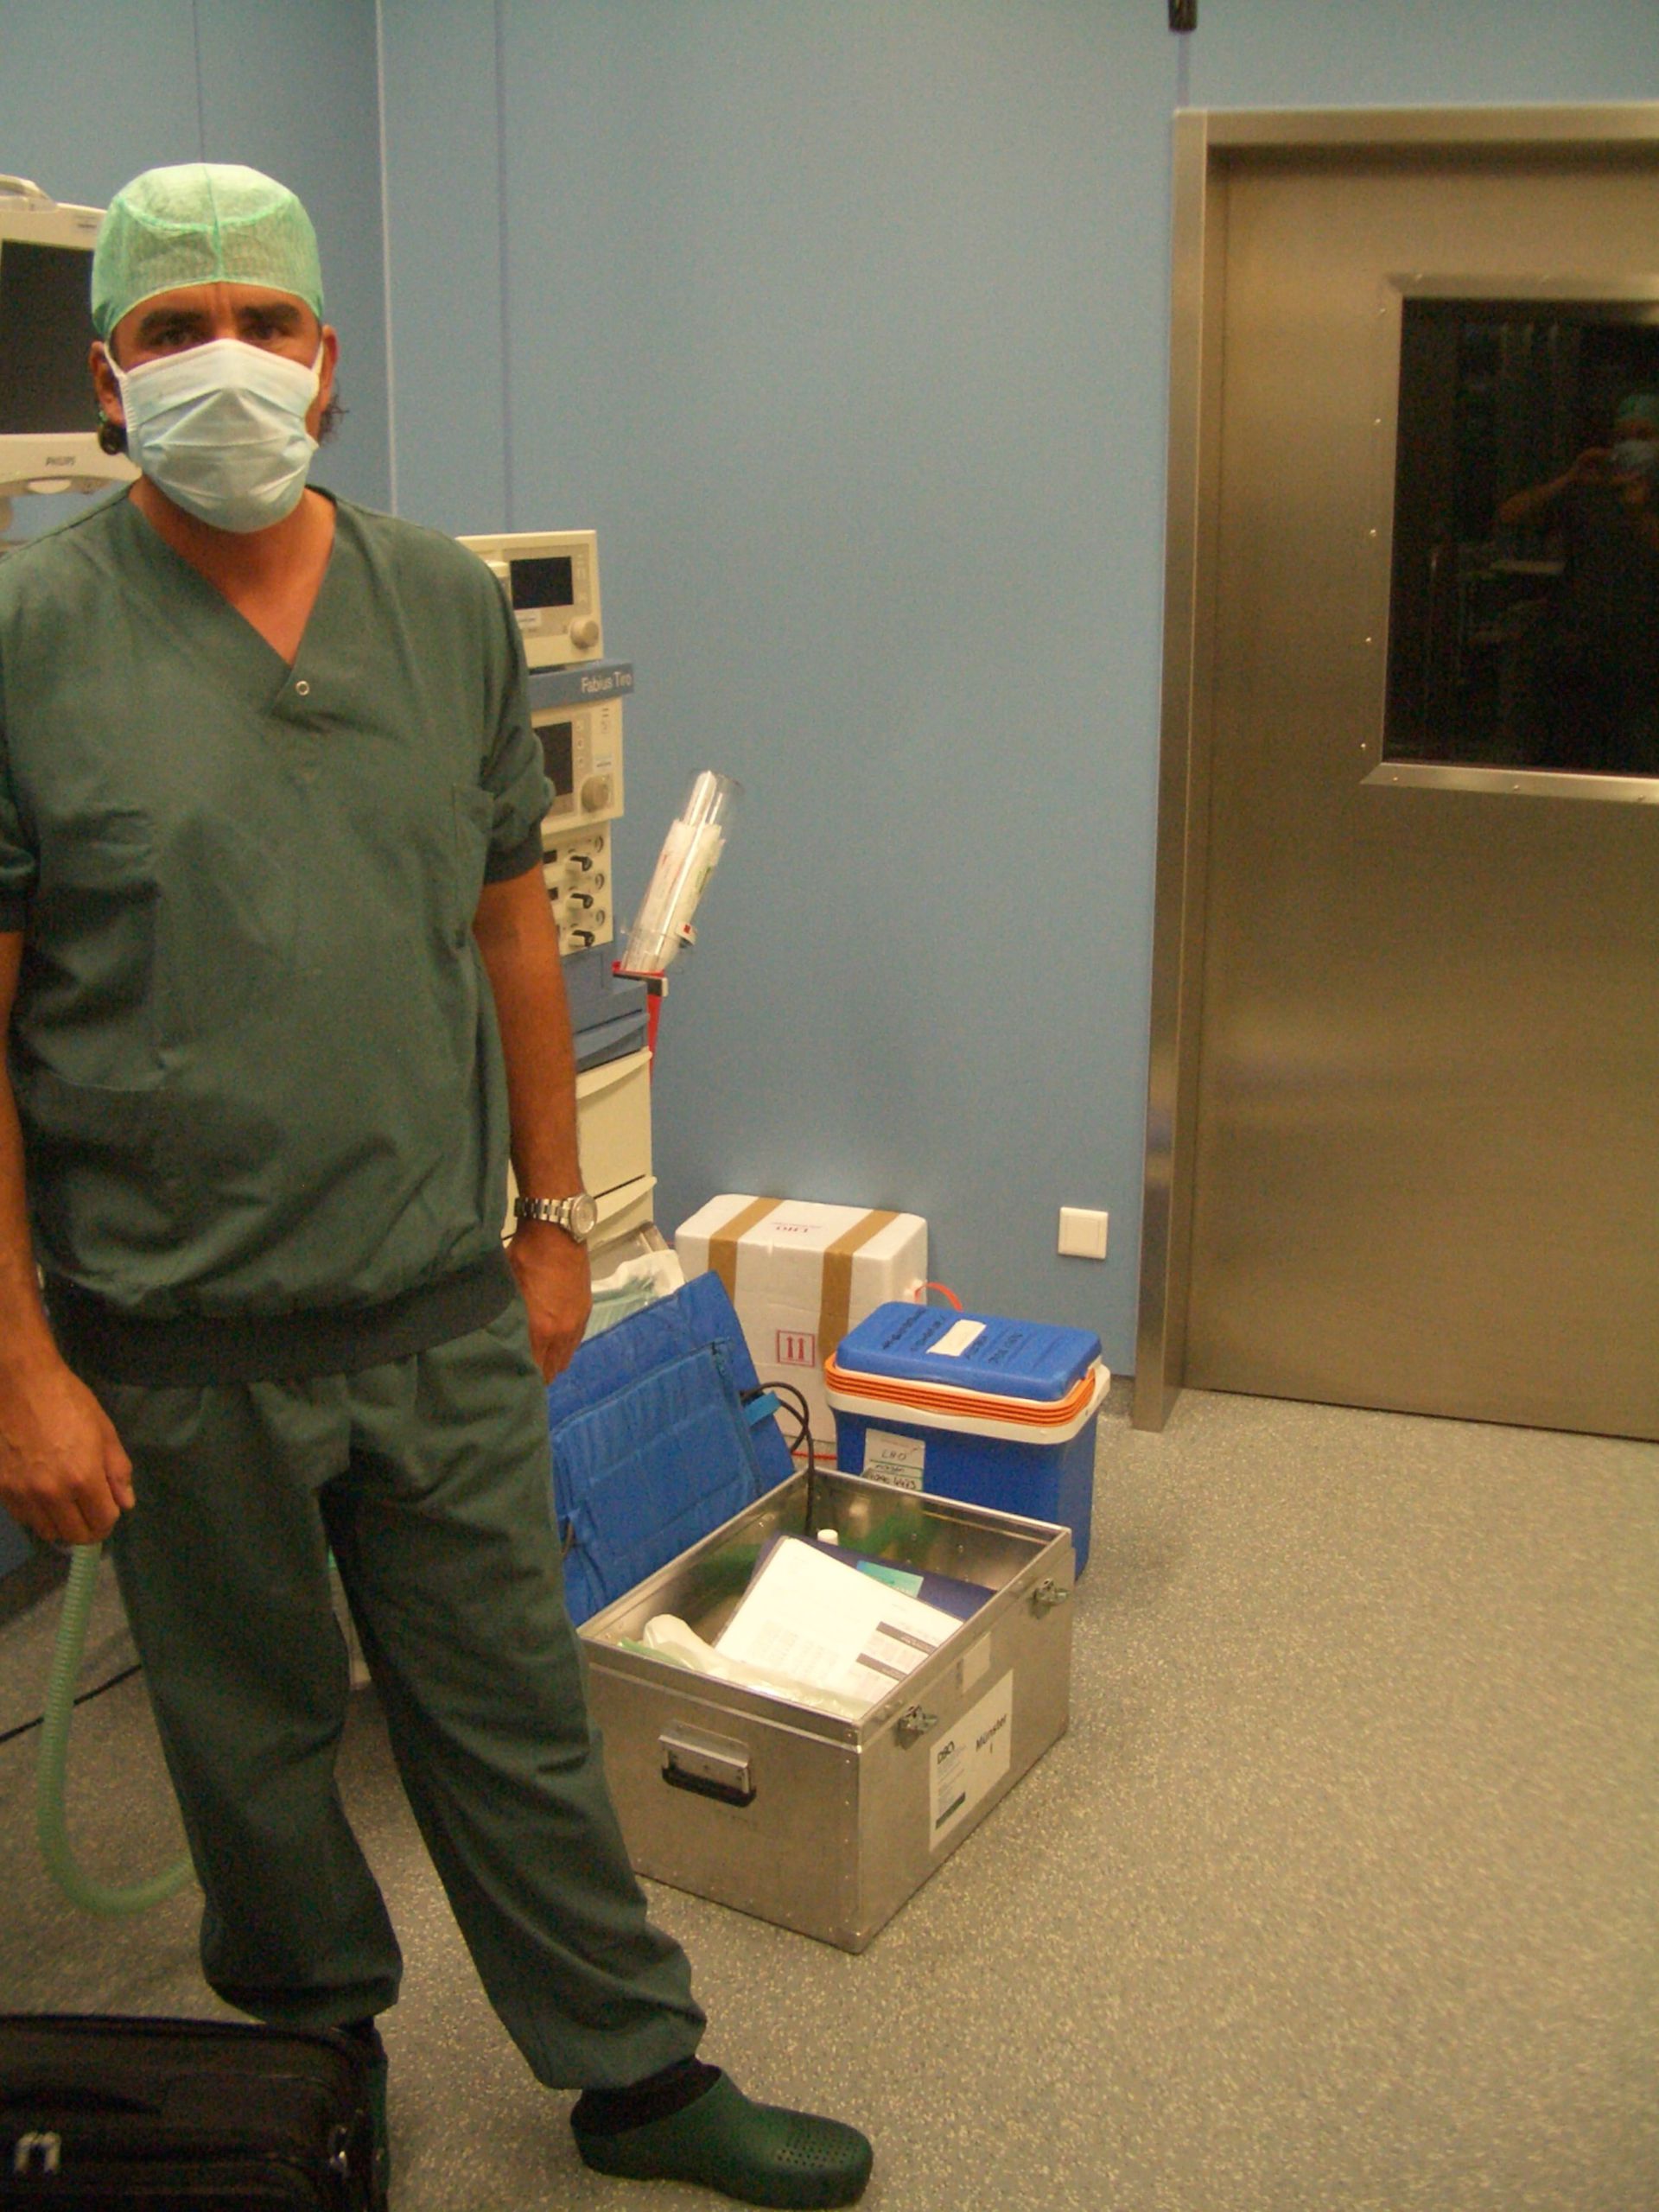 Perfusionist With His Equipment